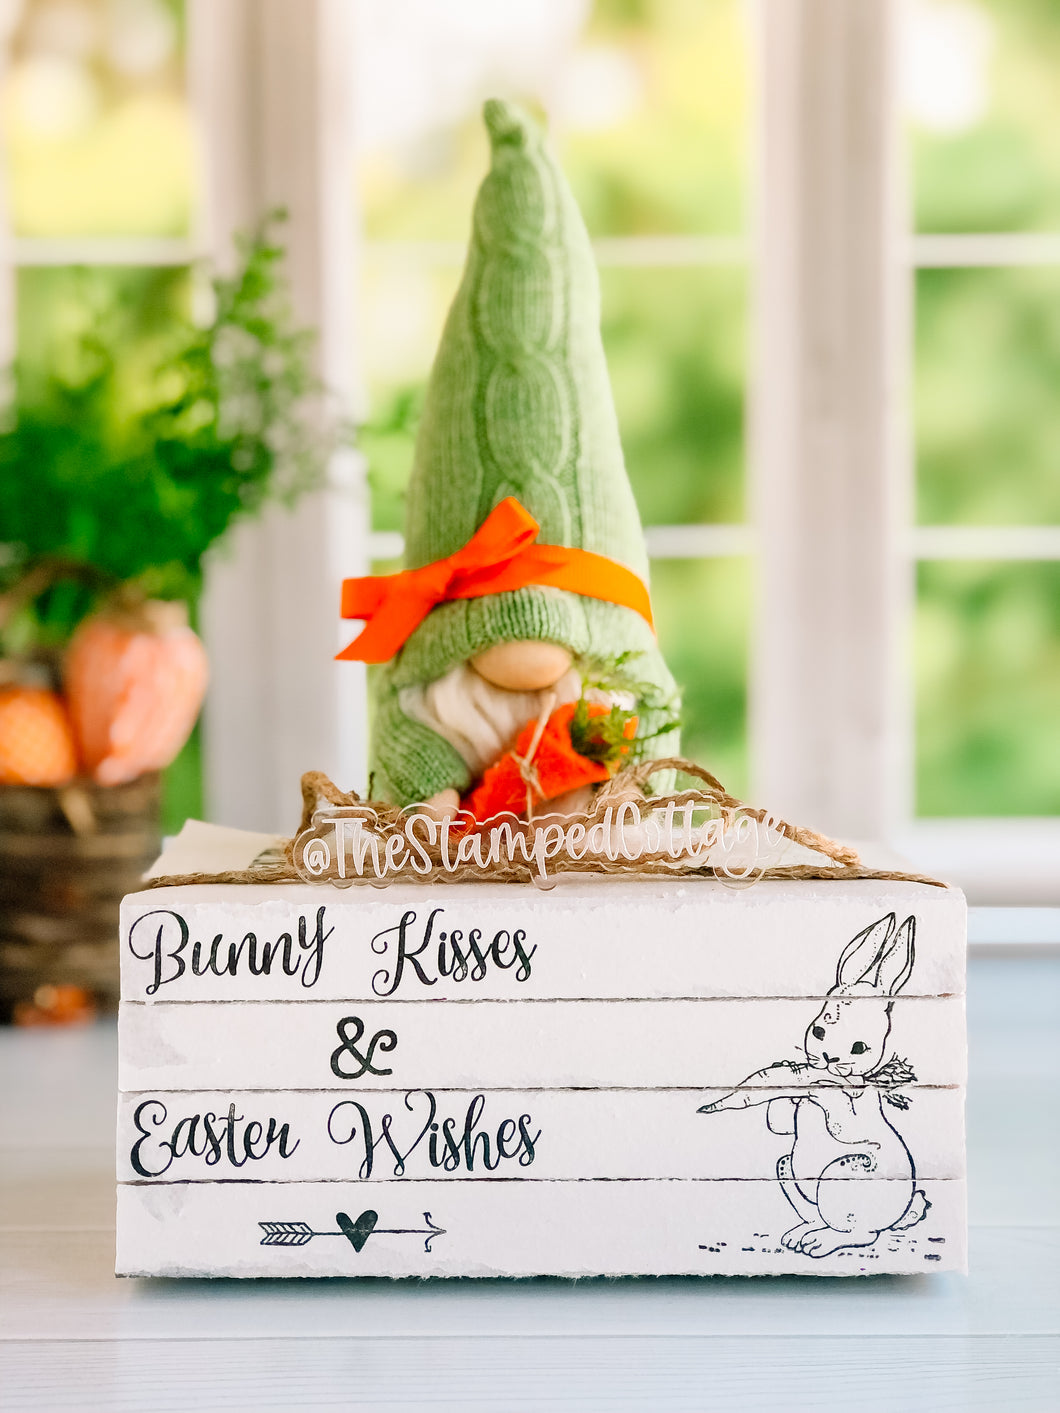 Stamped Book Stack - Bunny kisses & Easter Wishes